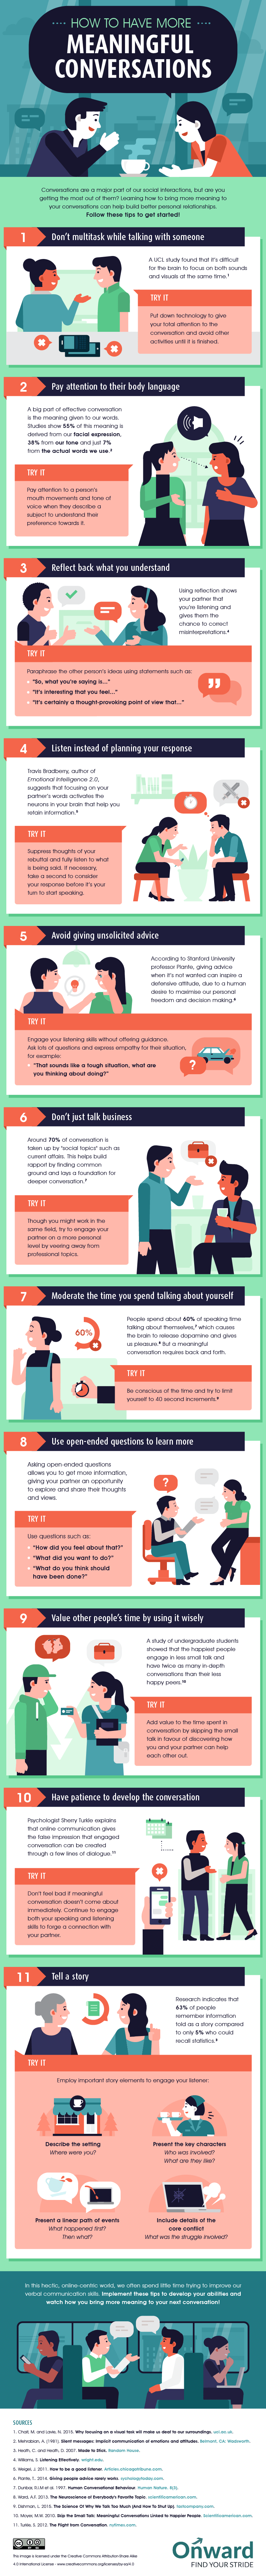 [Infographic] How To Have More Productive Conversations At Work